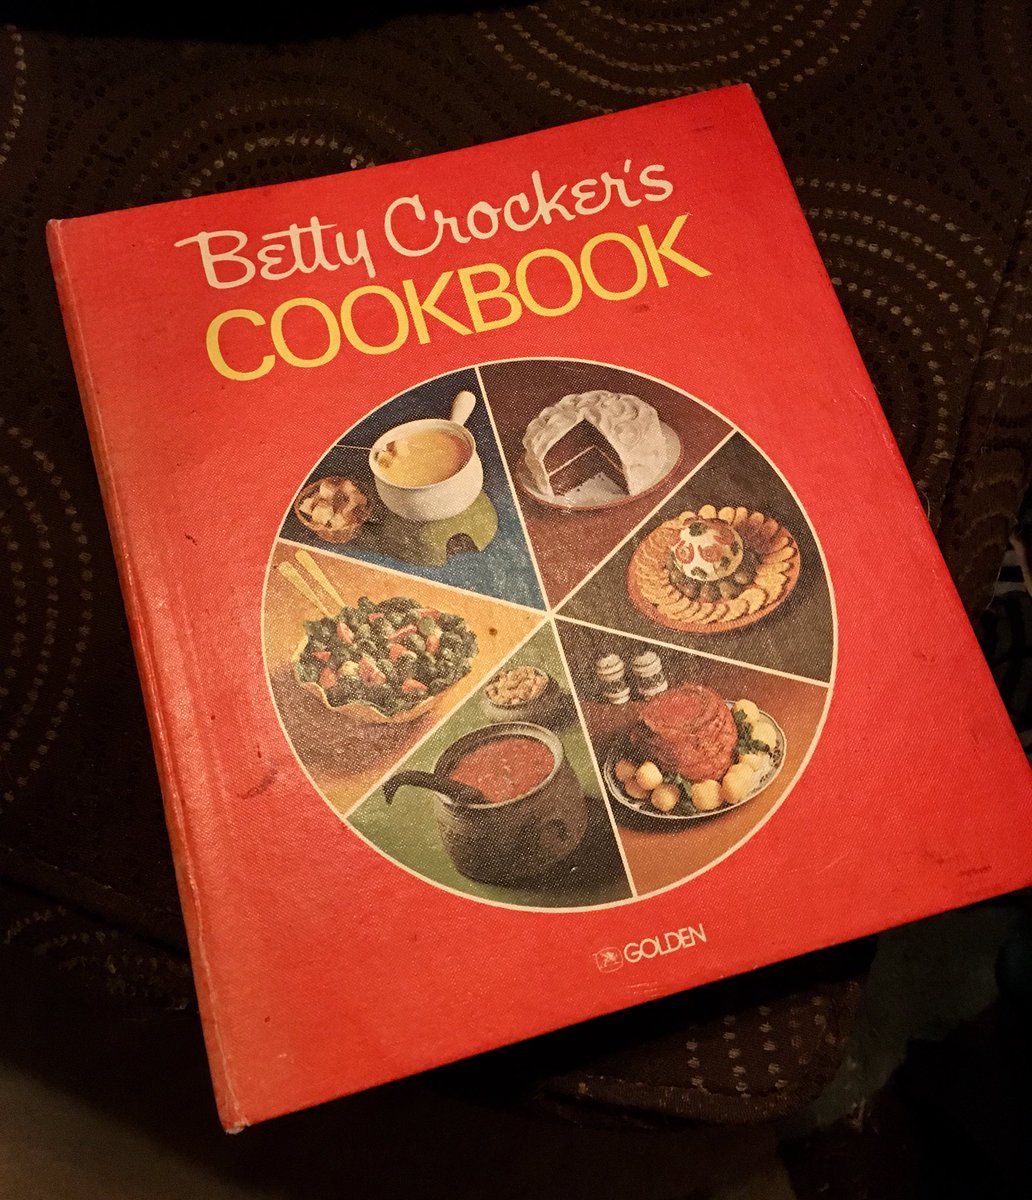 Yes, that’s right, future! It’s the 1969 edition of the Betty Crocker cookbook, with convenient removable binder pages for the menu-planning 1960s domesticant!You will be seeing more of this marvel. It’s a treasure trove of culture and insanities. I love every page. /4